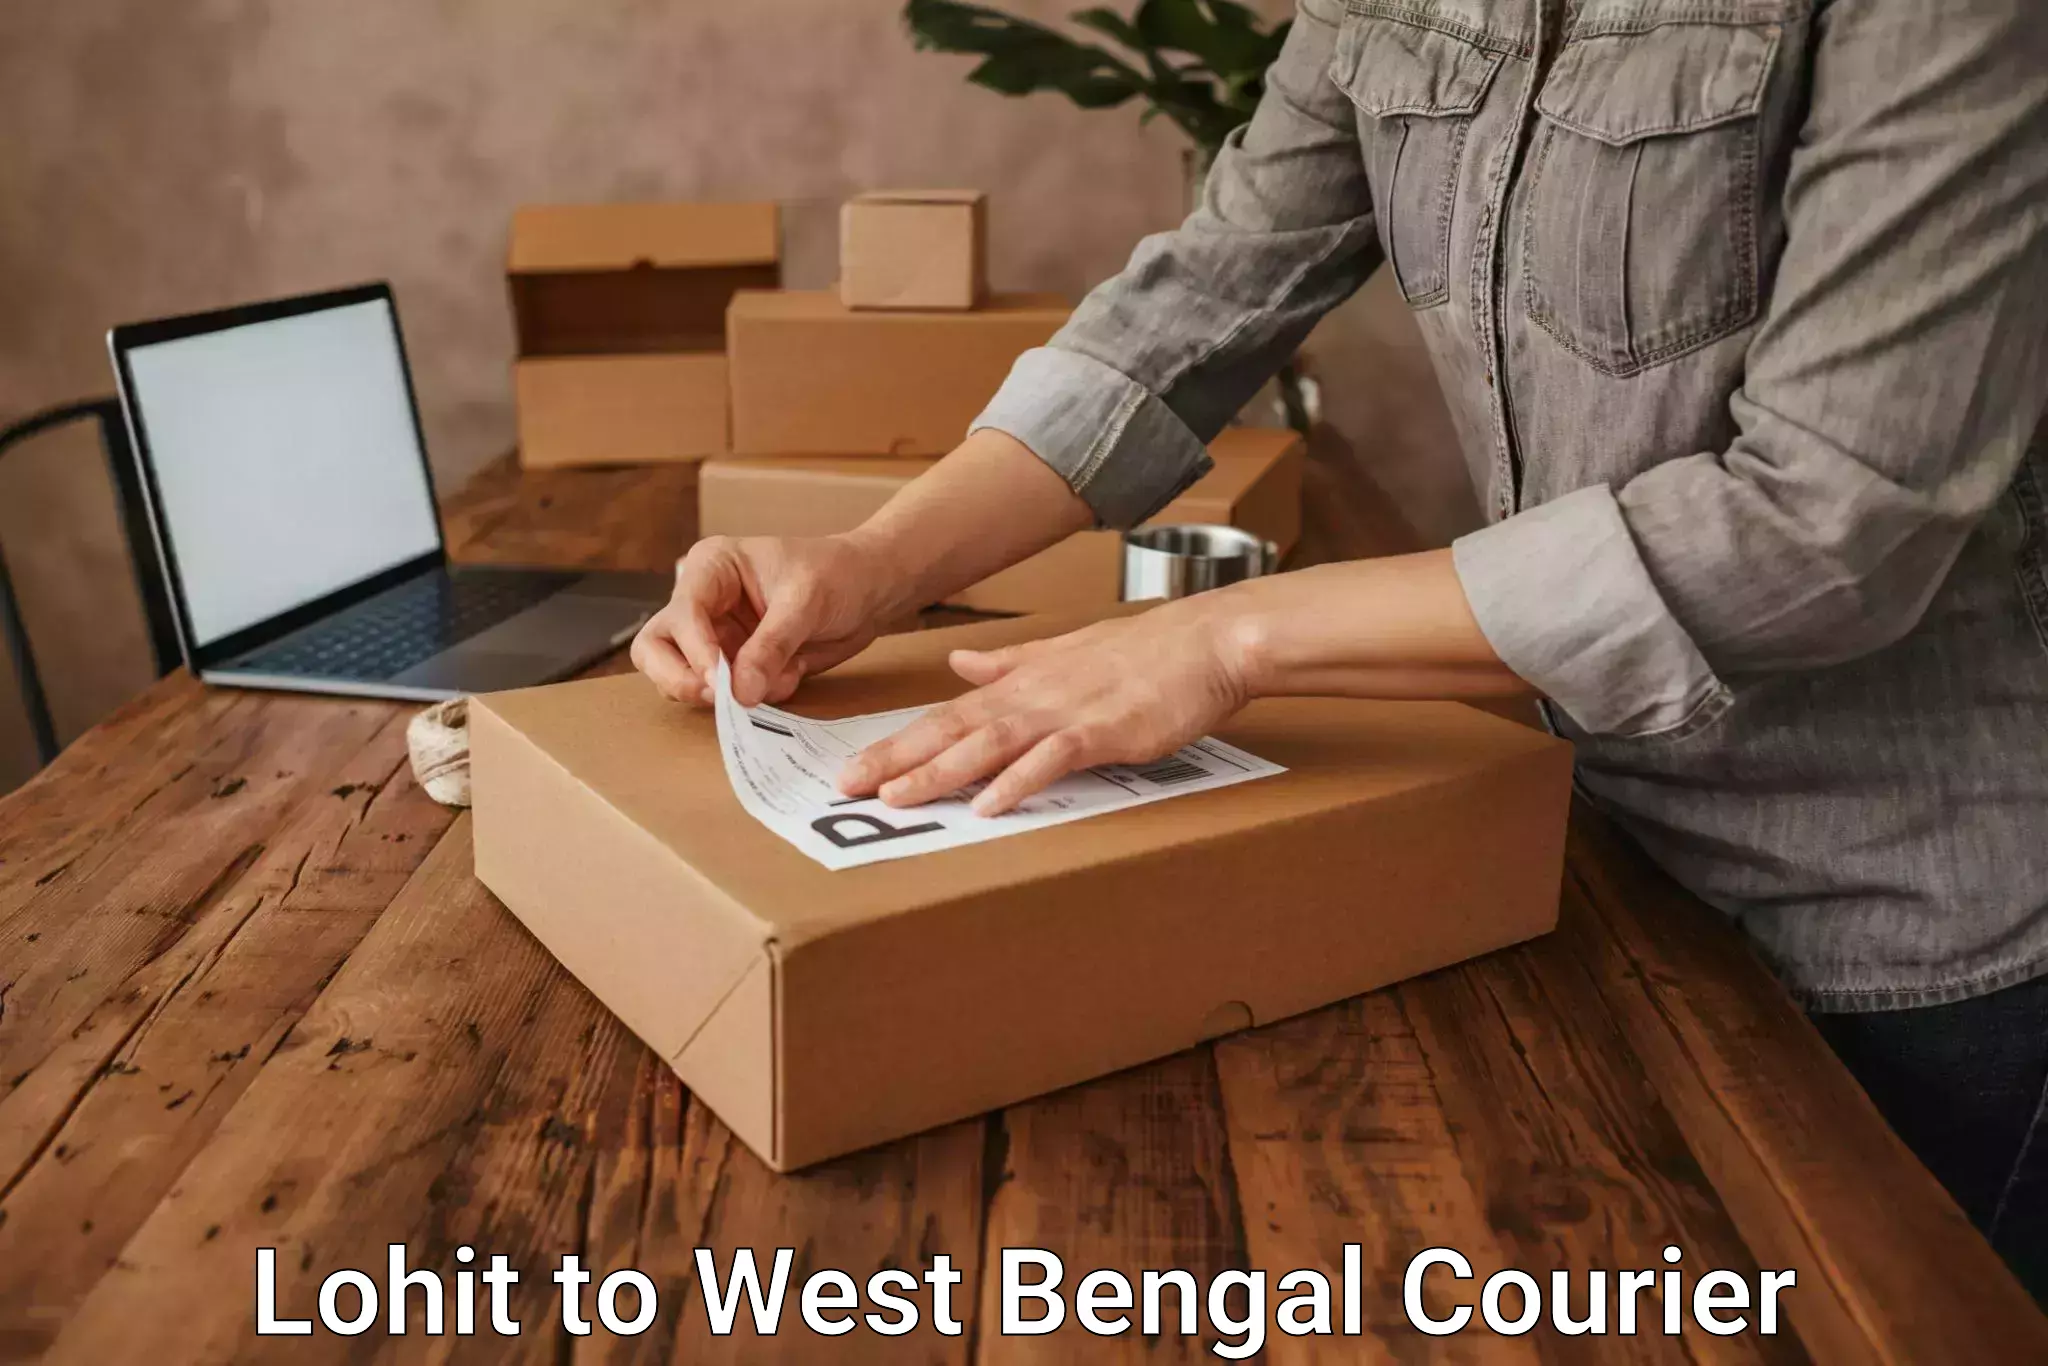 Courier service innovation in Lohit to West Bengal